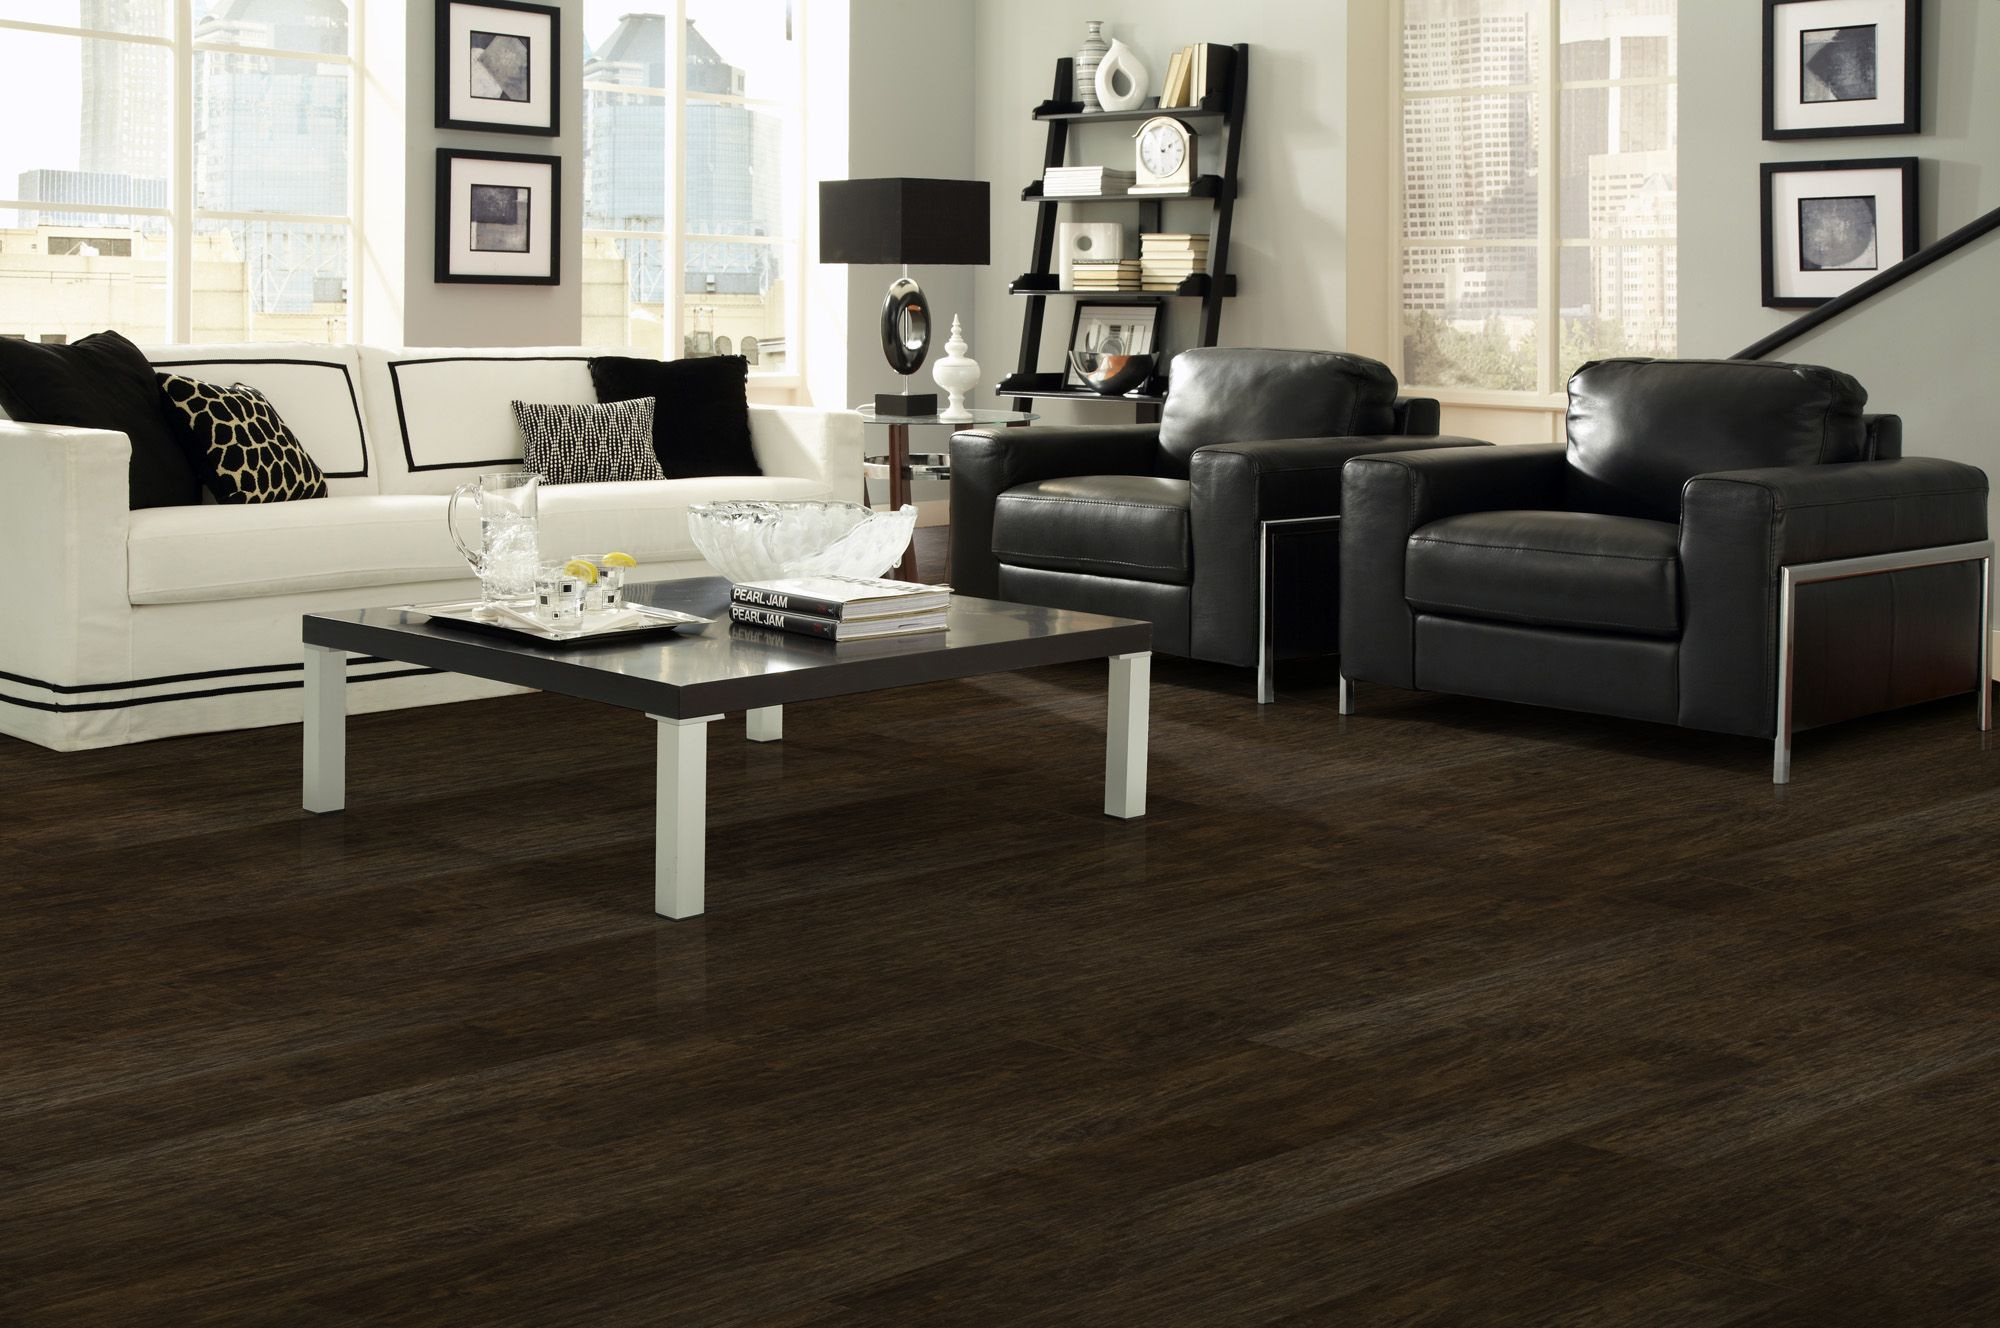 hardwood floor refinishing bowling green ky of black hills hickory a dream home laminate for the home within black hills hickory a dream home laminate